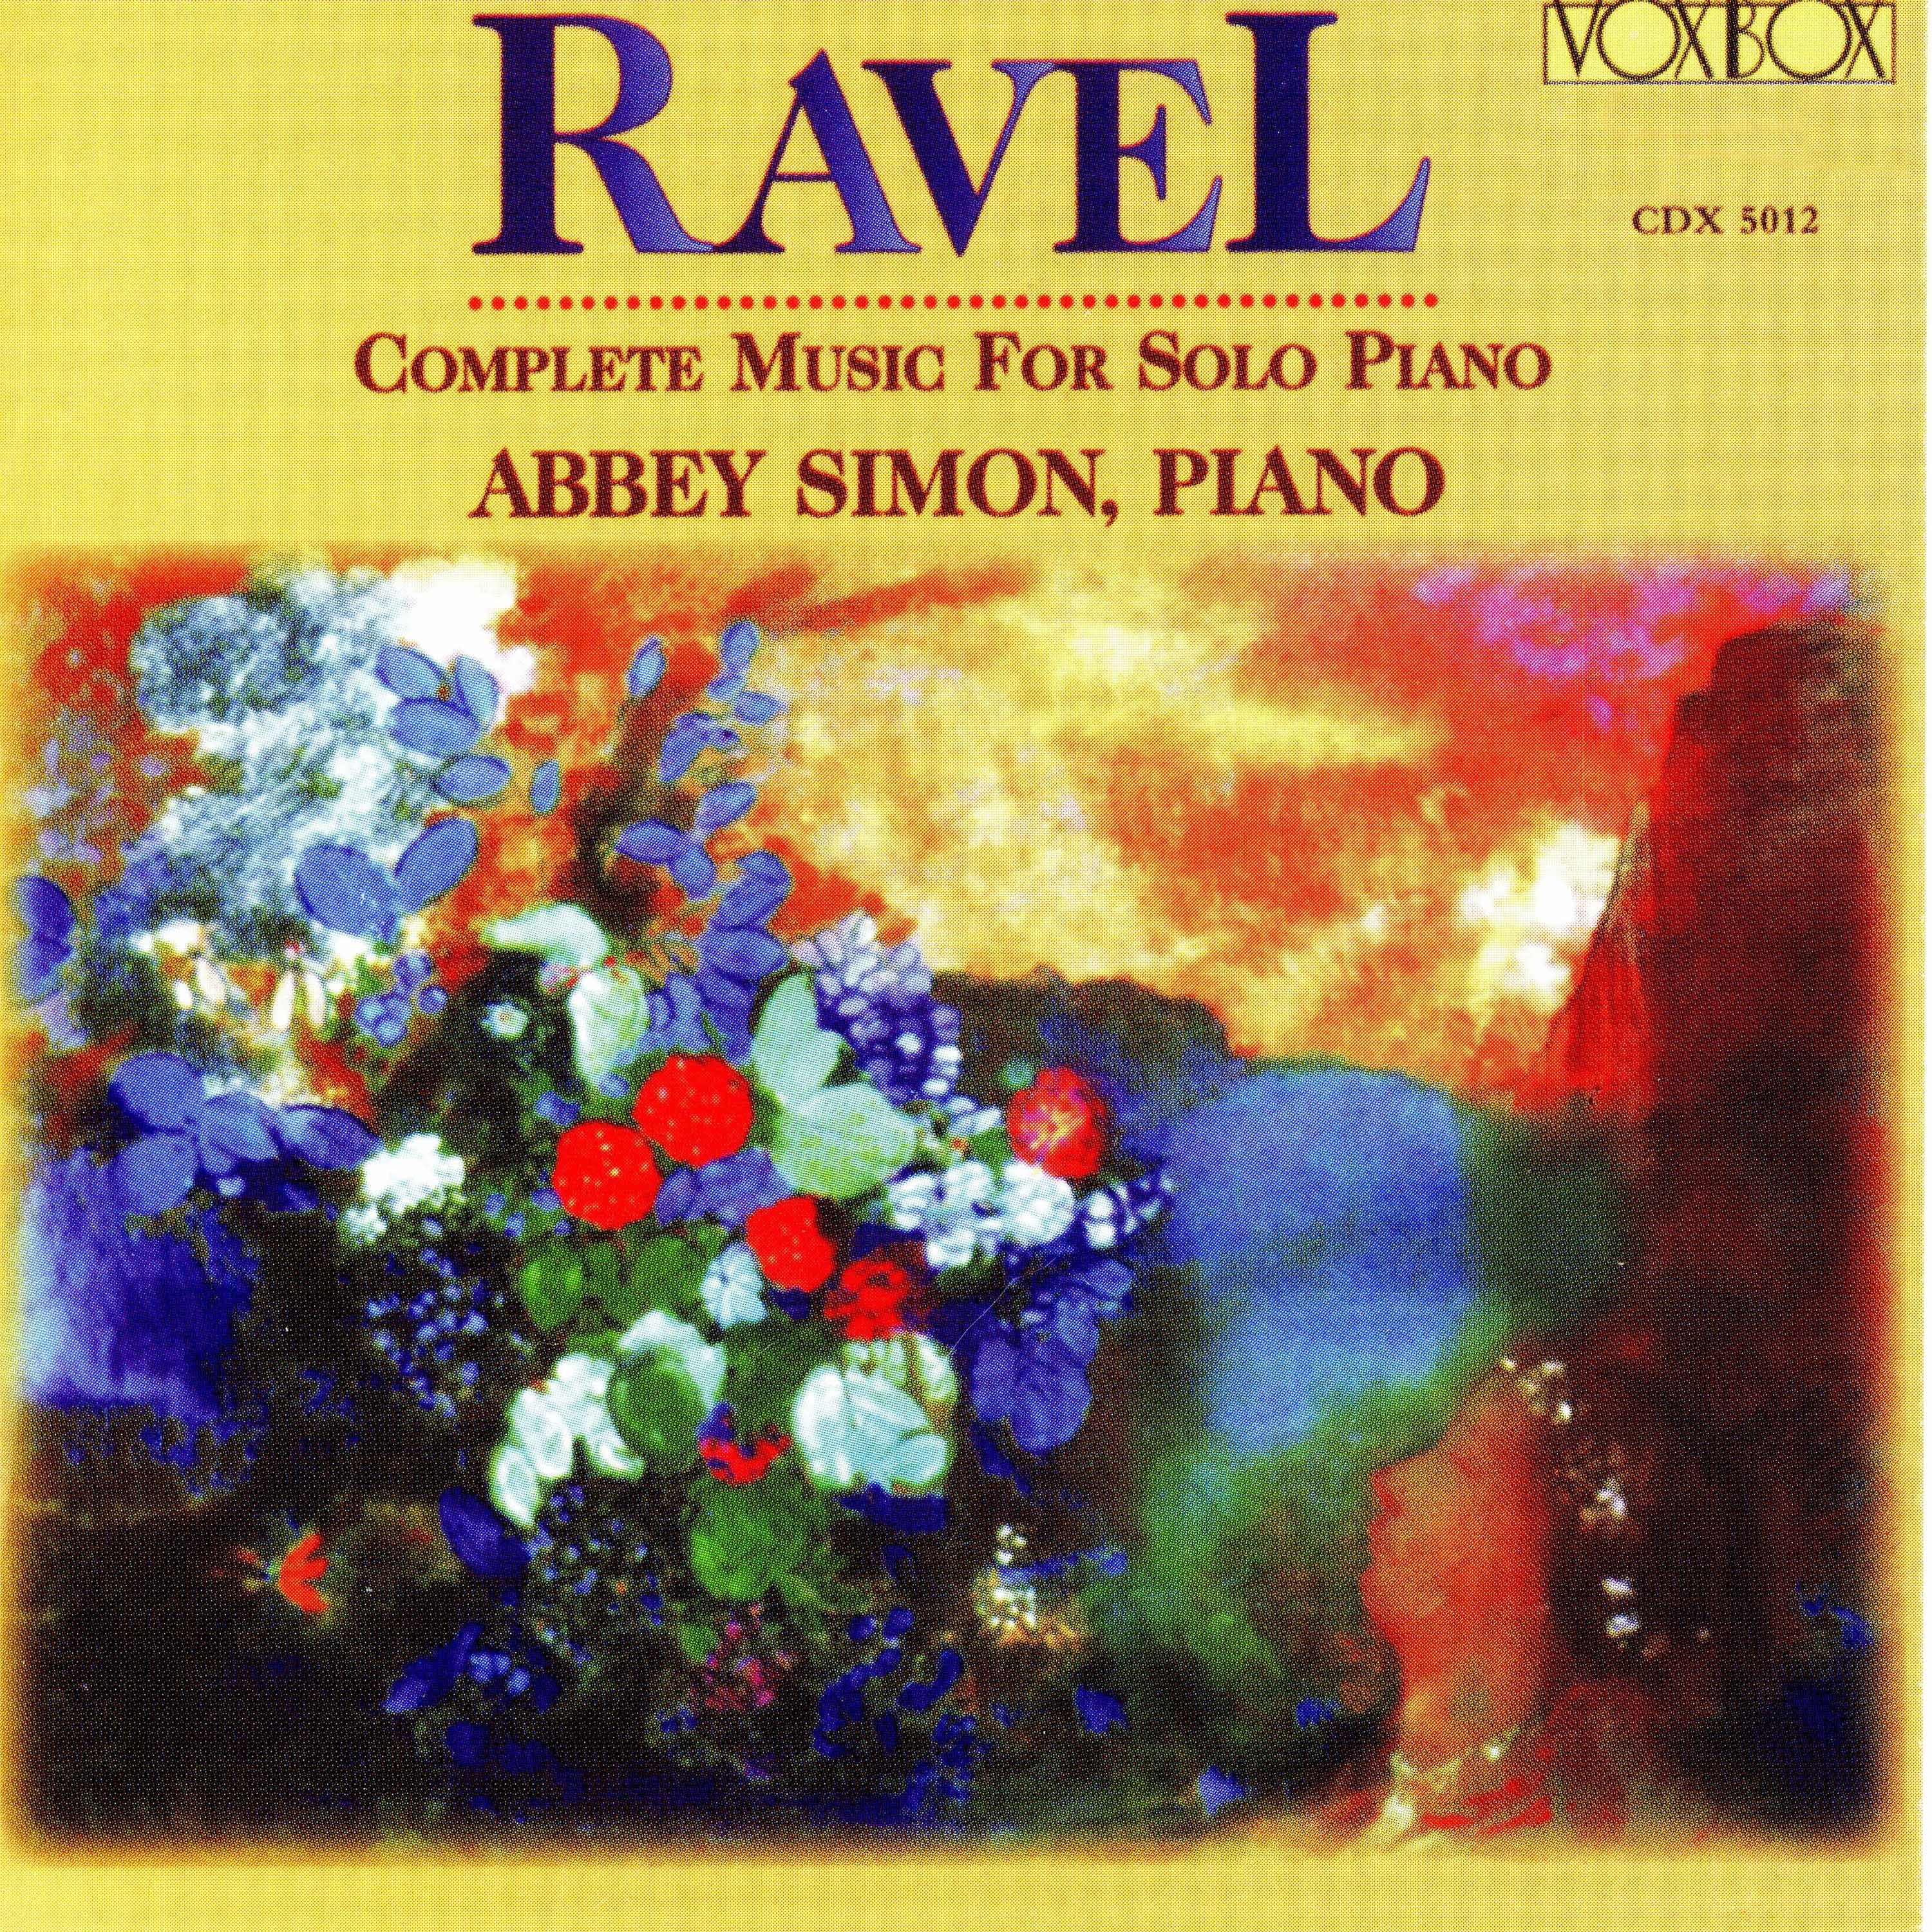 Abbey Simon - Ravel Complete Music for Solo Piano cd01